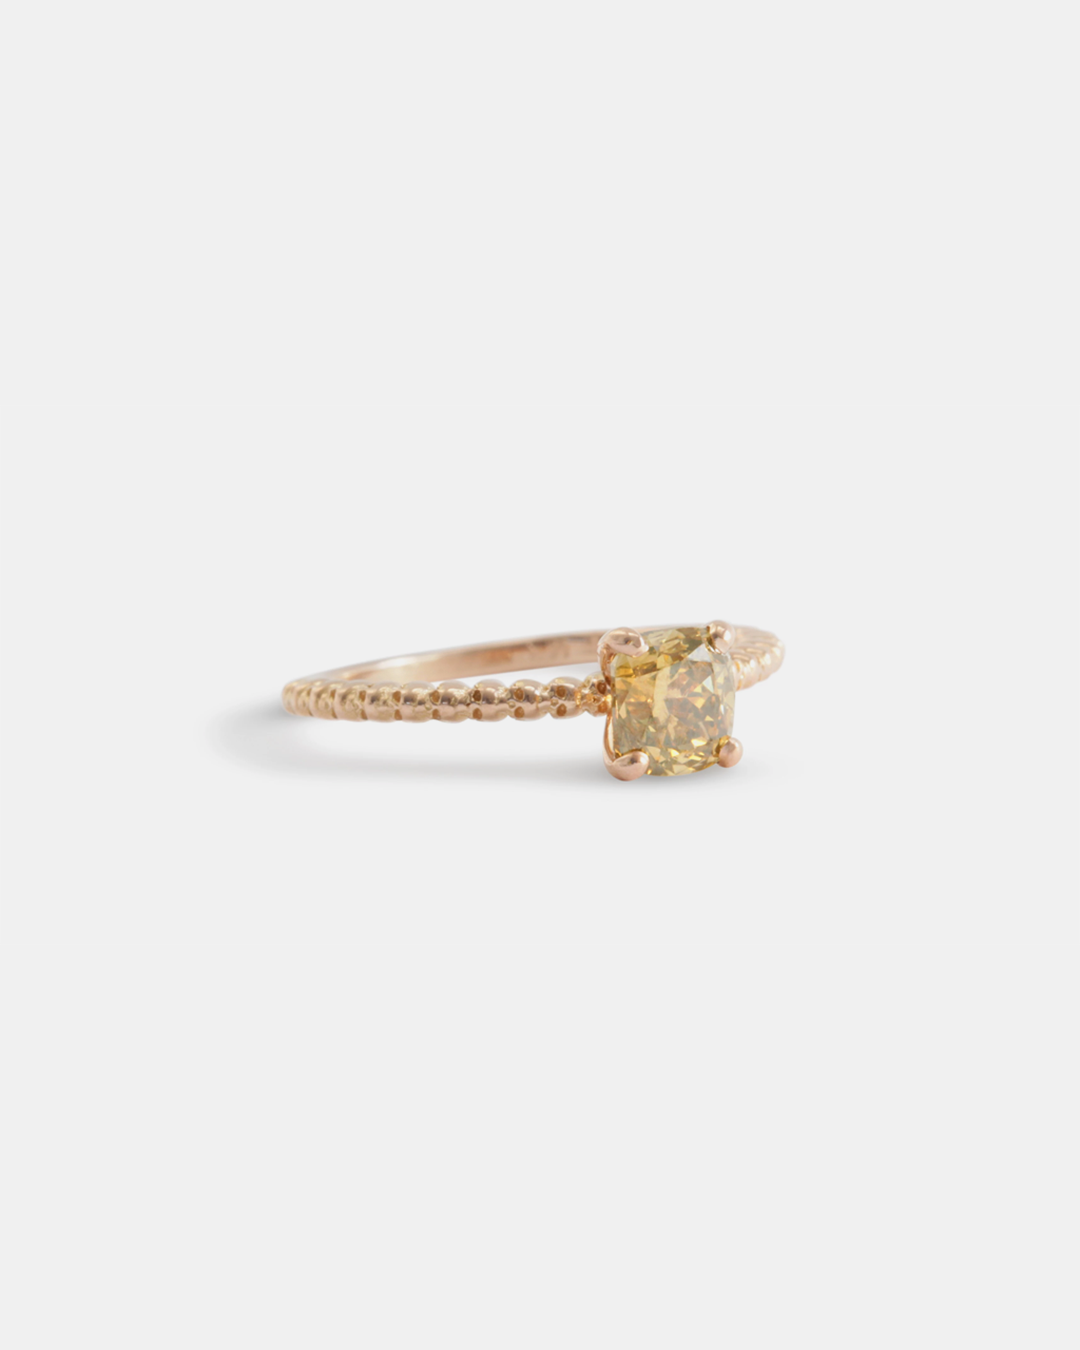 Someone To Look Over You / Champagne Diamond By fitzgerald jewelry